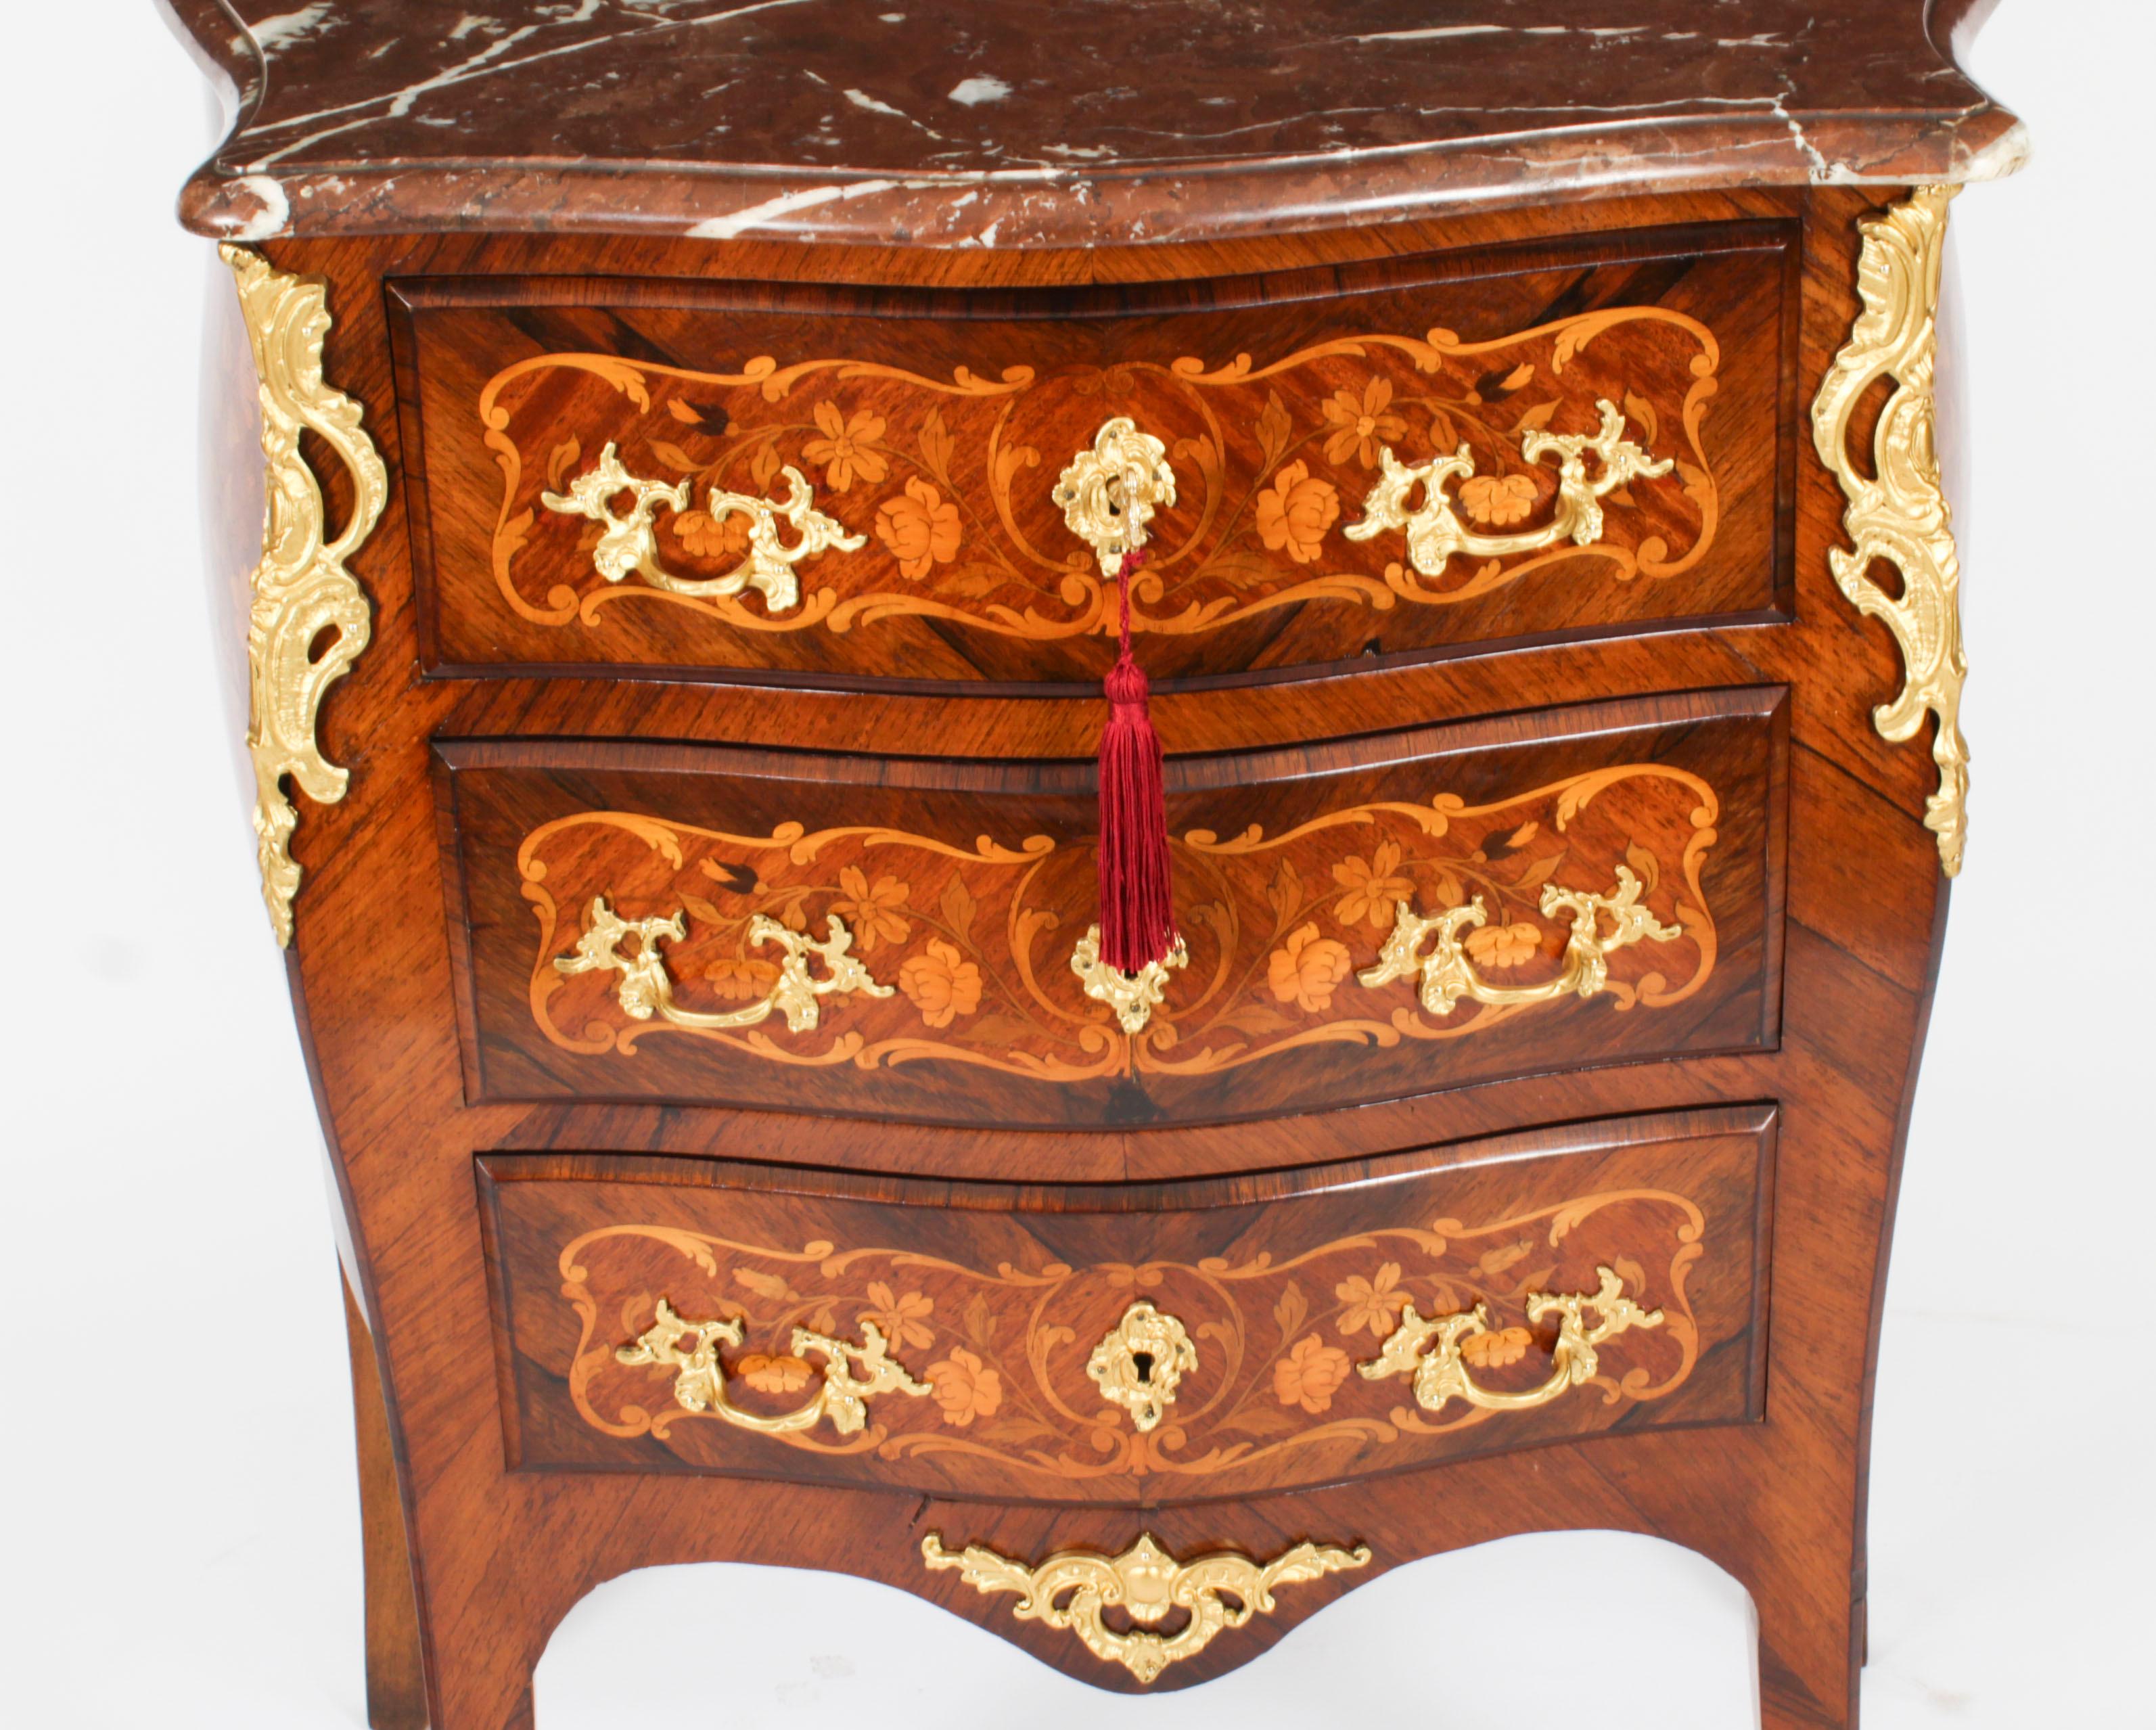 This is a stunning antique French Gonçalo Alves Louis Revival  commode, circa 1880 in date. 

This gorgeous commode features a serpentine Rouge Griotte marble top above three full width drawers for ample storage, and was inspired by the Louis XV